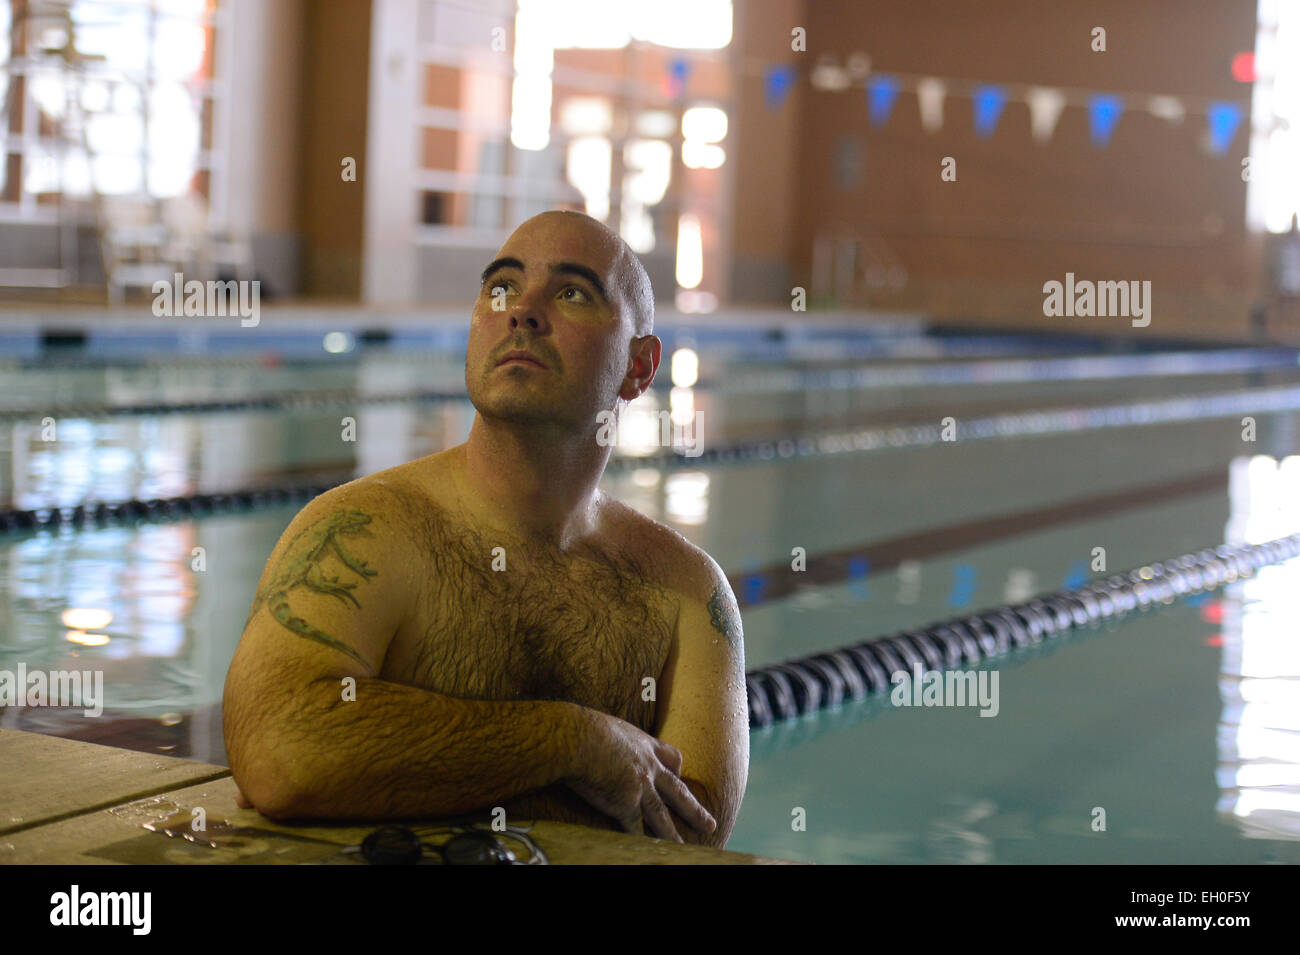 Jason Caswell, a 2015 Air Force Wounded Warrior swimmer, receives swimming instructions during the Air Force Wounded Warrior team trials on Nellis AFB, Nev. Feb. 28, 2015. The Air Force Trials are an adaptive sports event designed to promote the mental and physical well-being of seriously ill and injured military members and veterans. More than 105 wounded, ill or injured service men and women from around the country will compete for a spot on the 2015 U.S. Air Force Wounded Warrior Team which will represent the Air Force at adaptive sports competitions throughout the year. Stock Photo